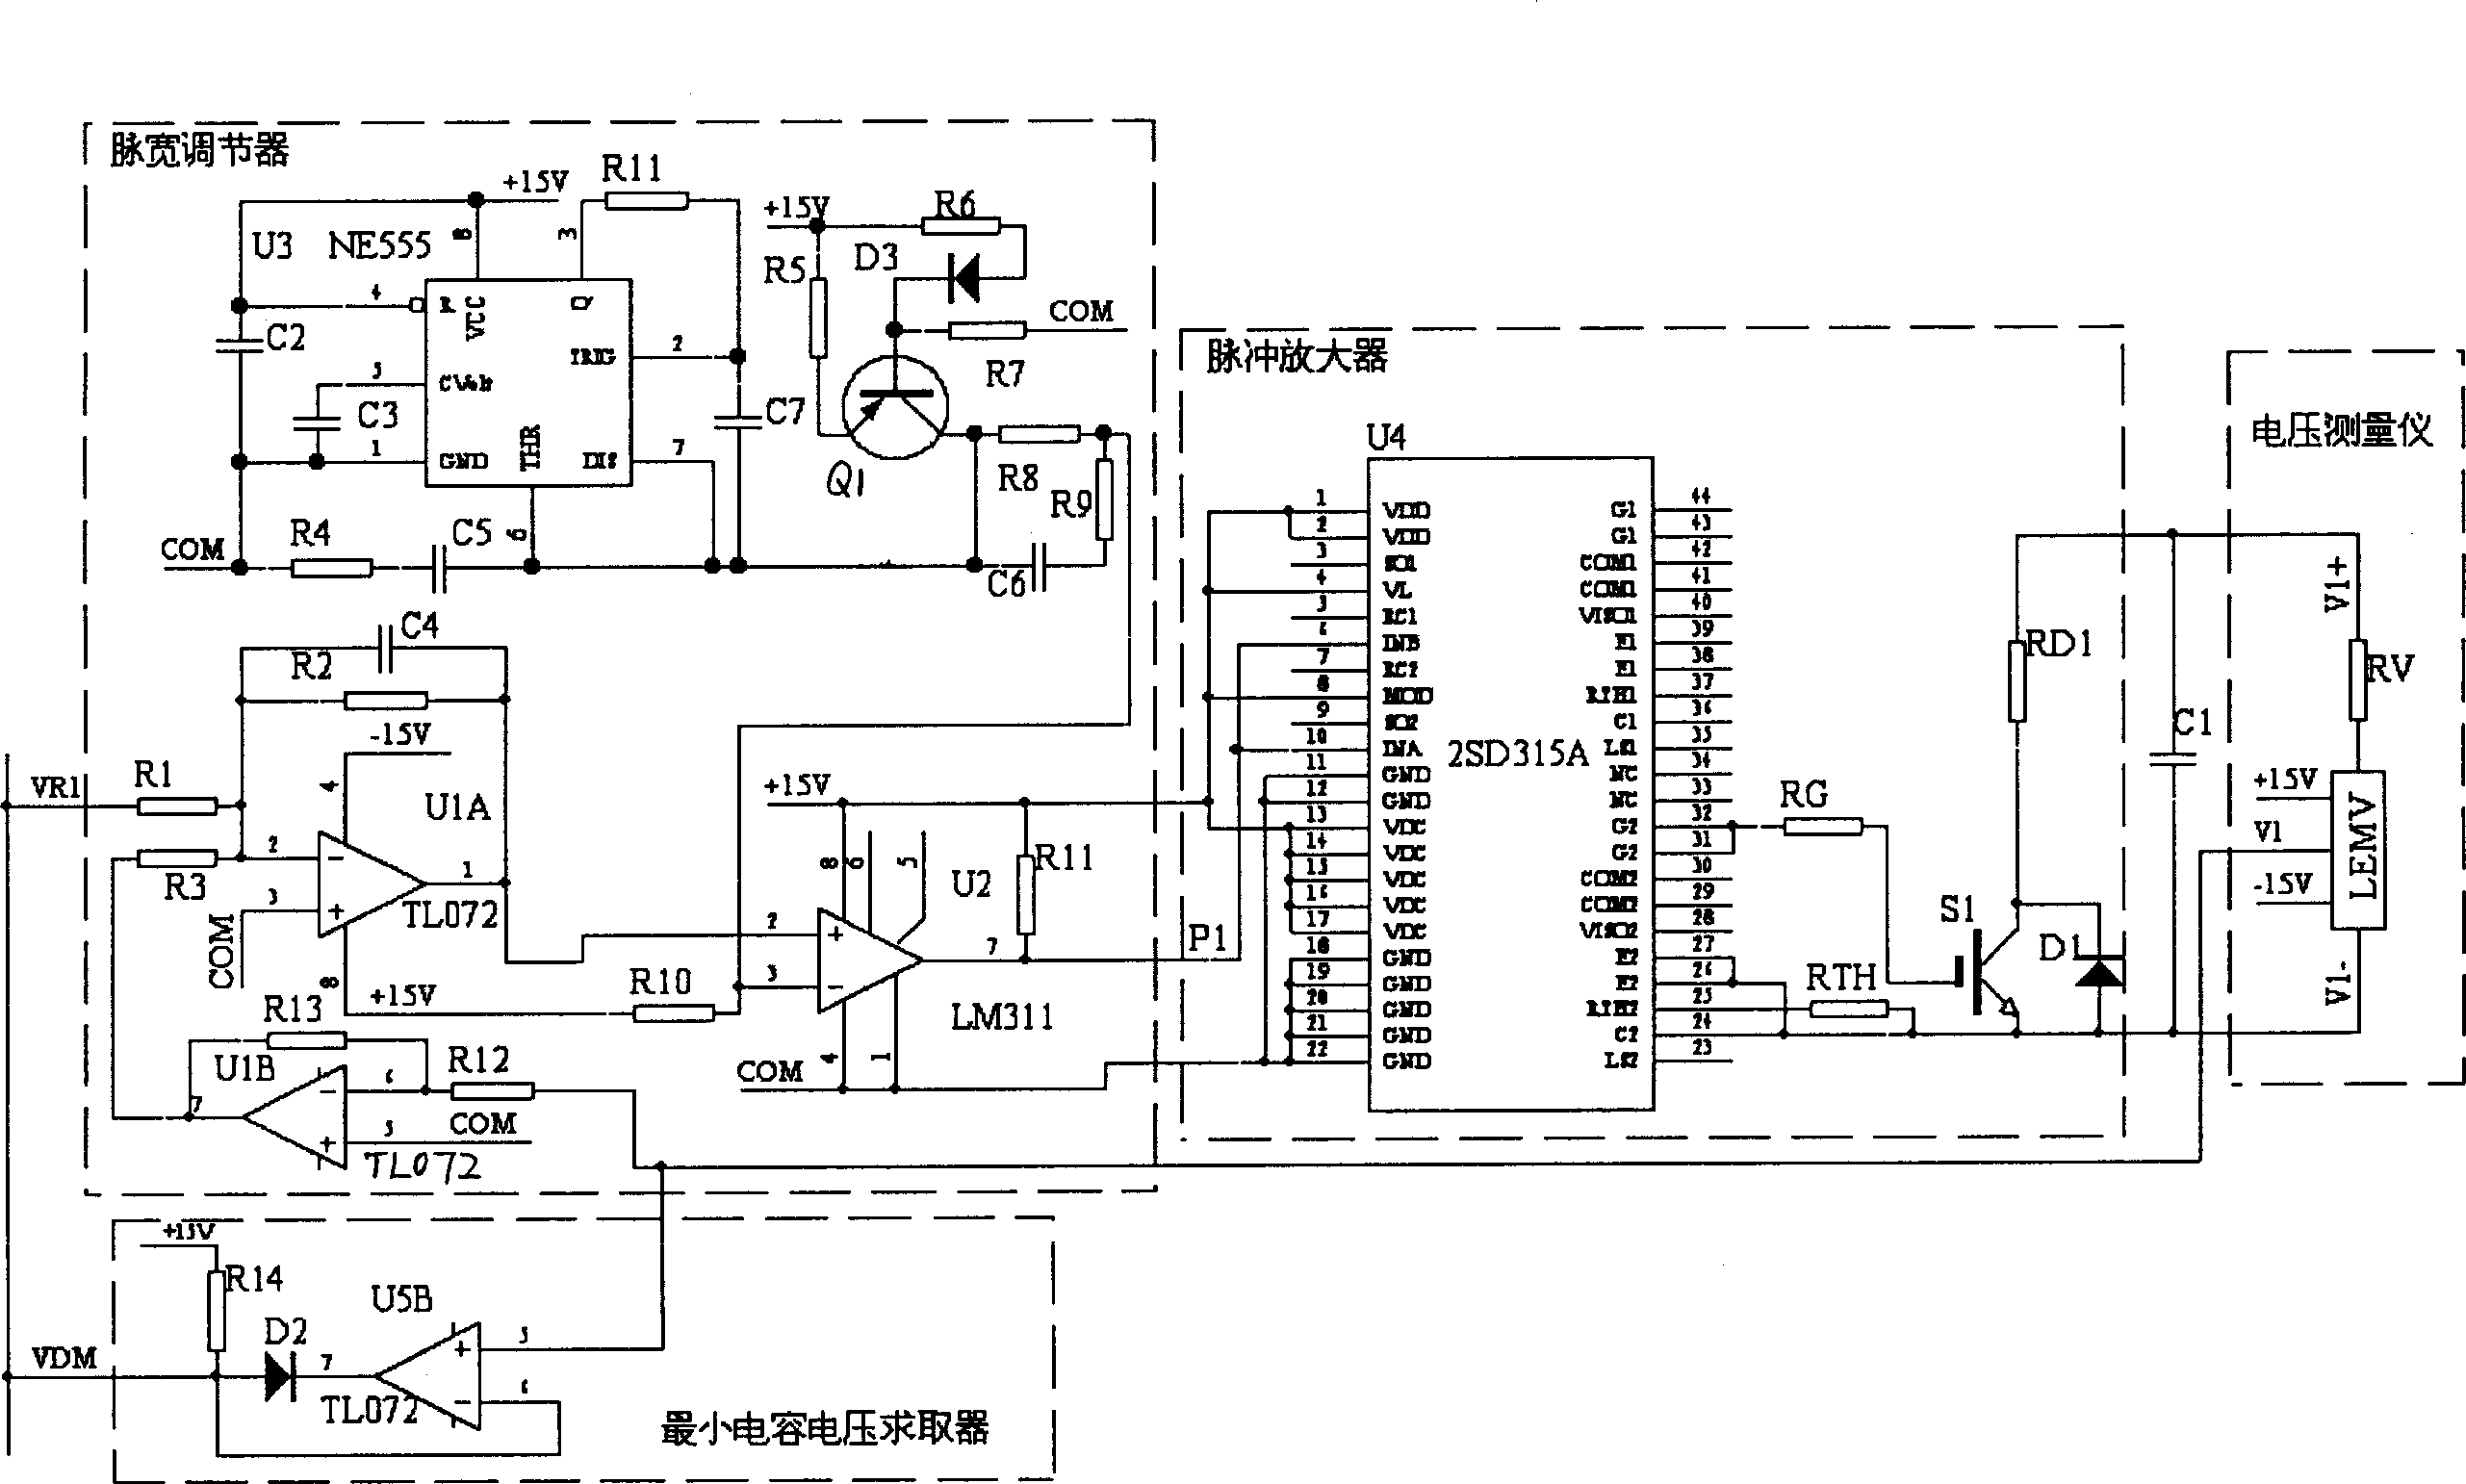 Direct current voltage balancing circuit of reactive generating device based on chained invertor